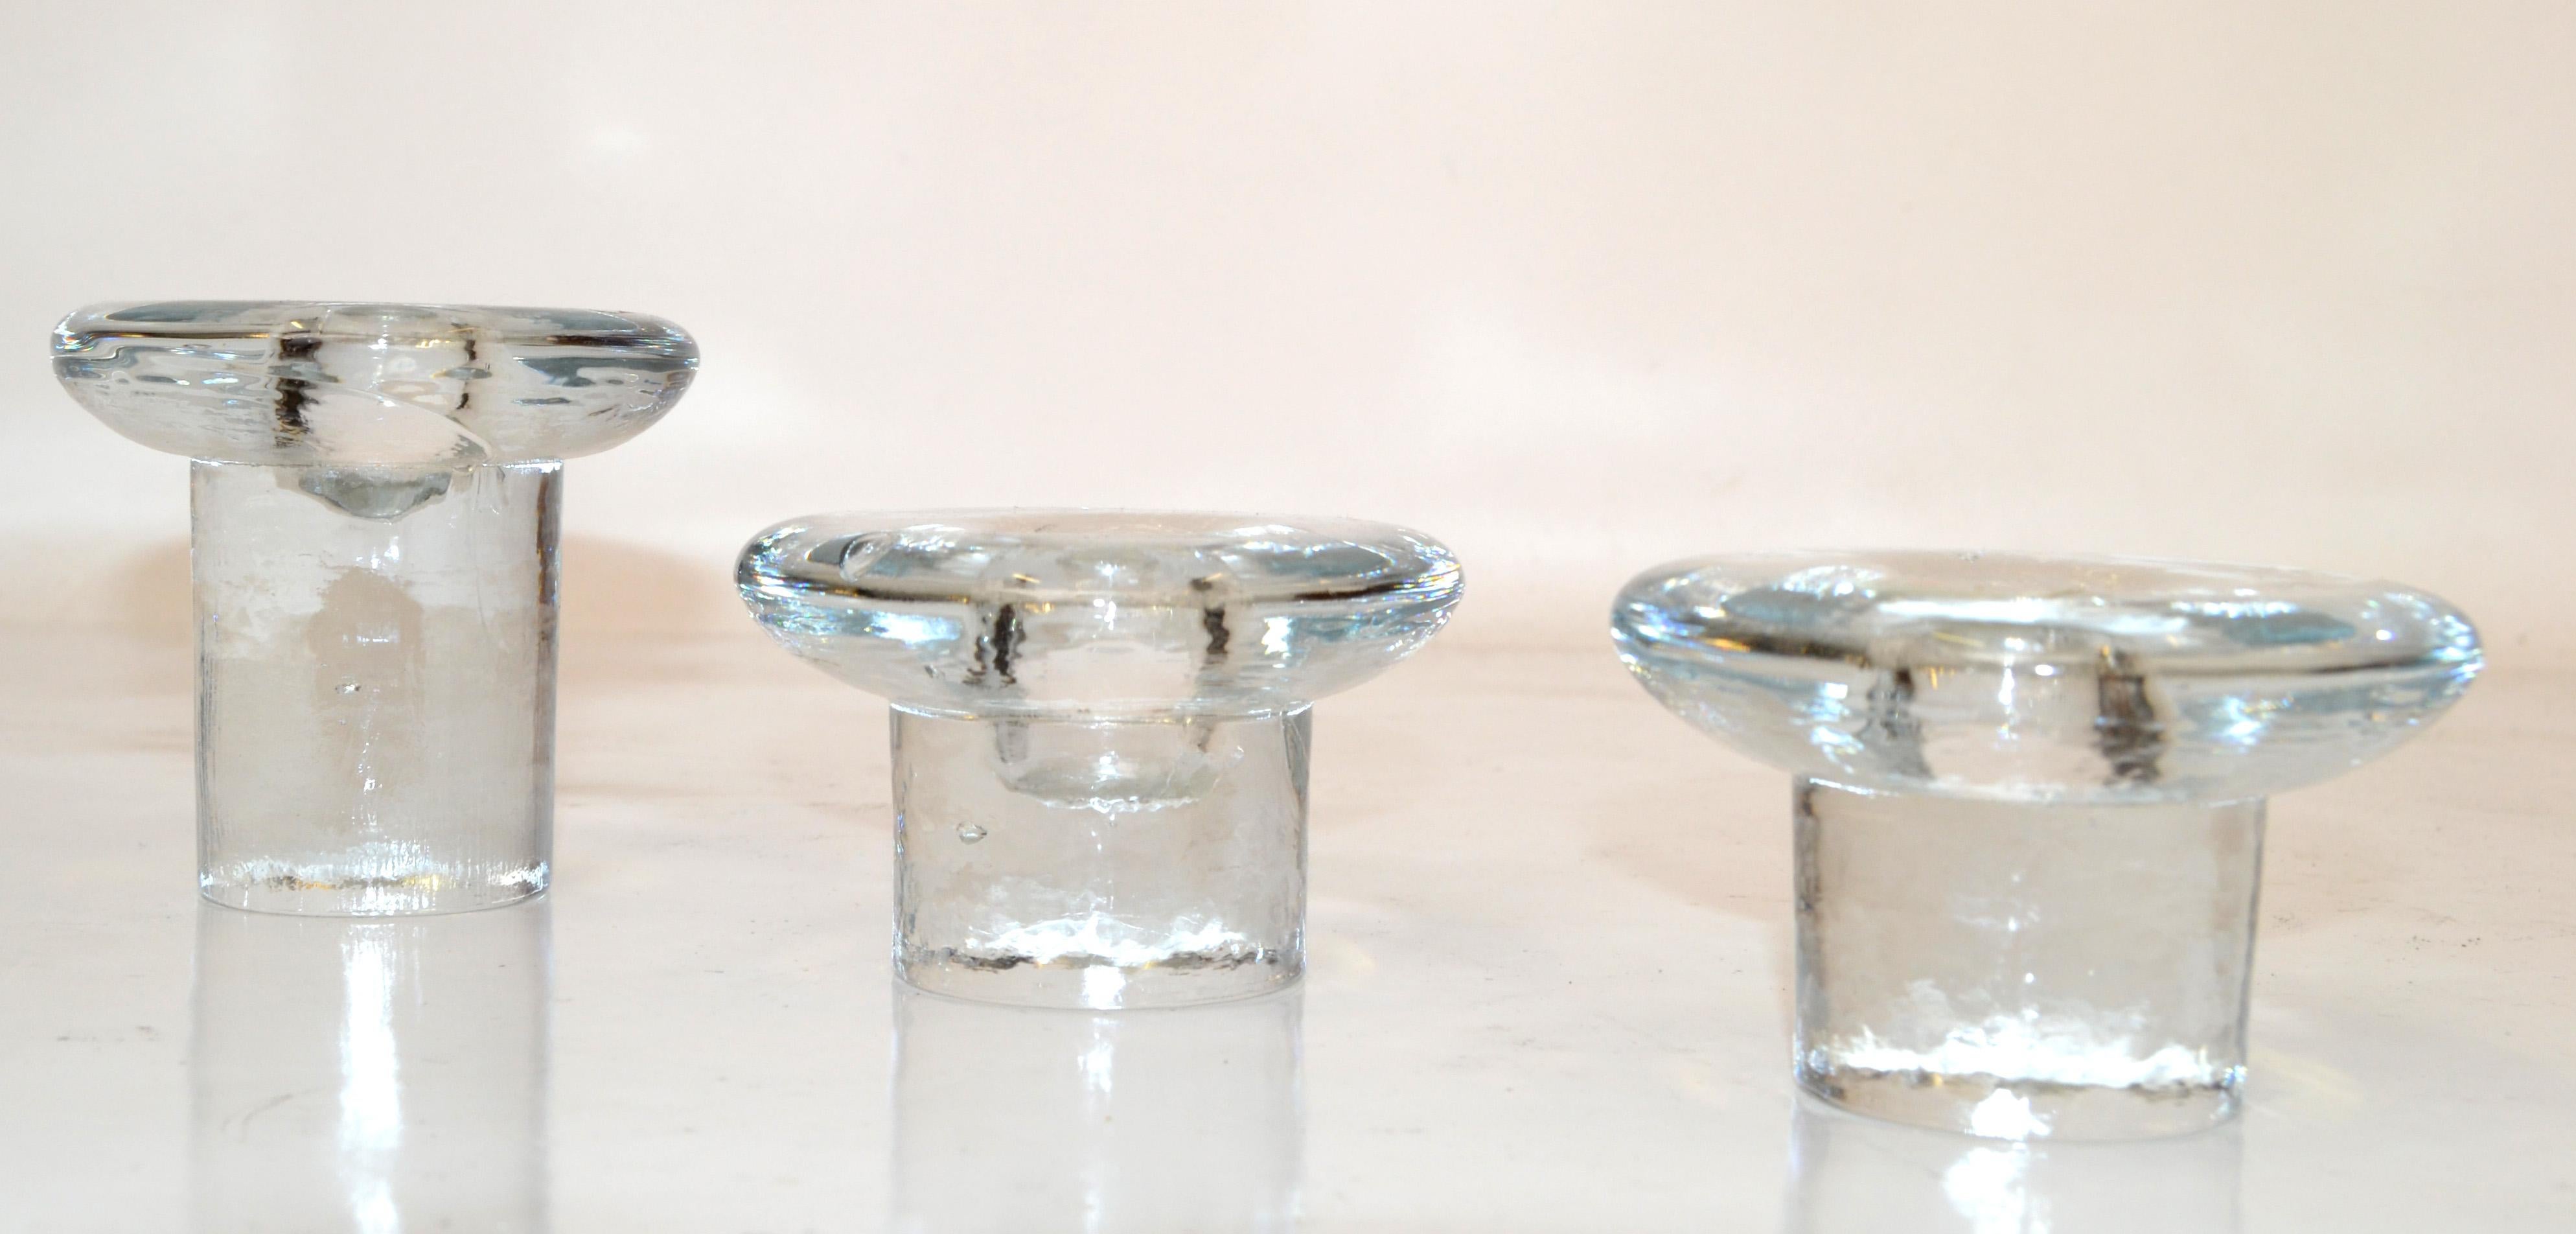 Set of 3 Vintage Blenko Transparent Art Glass Ice Mushroom Candle Holders designed by Don Shepherd made in the United States in circa 1970s.
Makers Mark at the top of the Candle holder.
The 2 smaller Mushroom Crystal Glass Candle Holders measure: